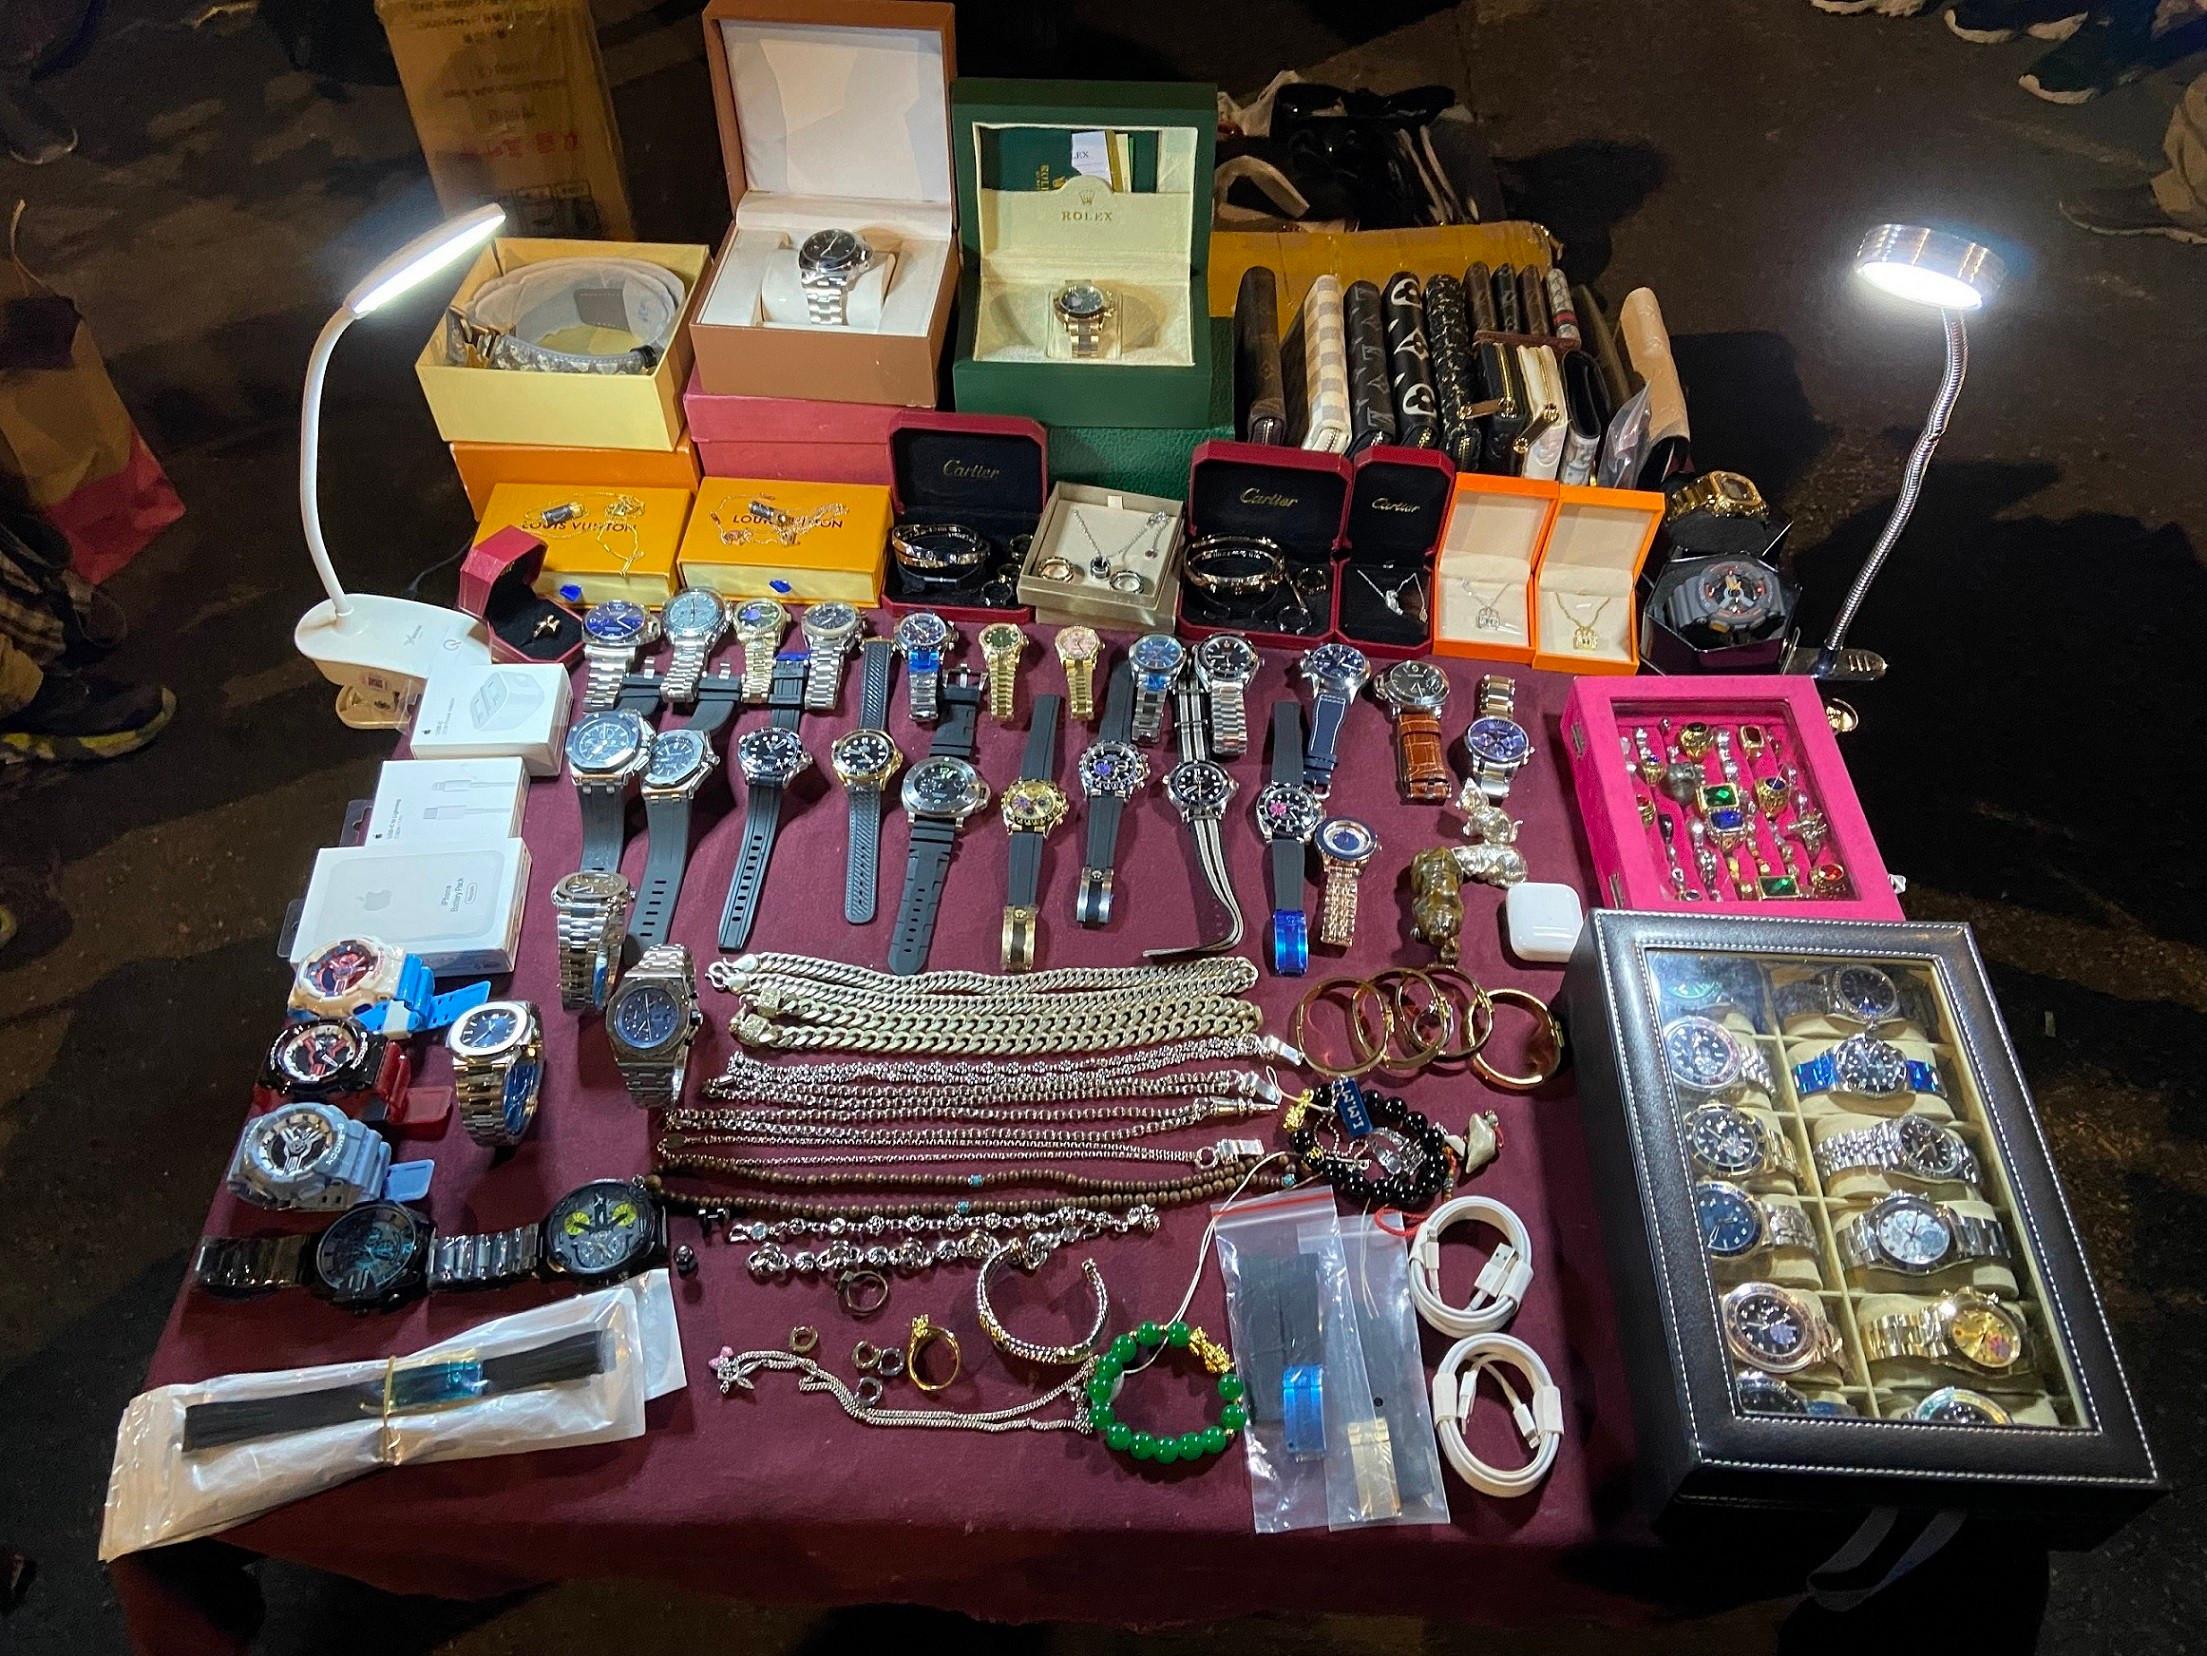 With regard to Internet rumours that Customs officers were trying to incriminate an ethnic minority young man by fabricated evidence yesterday (January 14), a spokesman for Hong Kong Customs today (January 15) solemnly clarified that the rumours are unfounded. Photos shows some of the suspected counterfeit goods, including wallets and watches, seized by Customs officers in the relevant case.